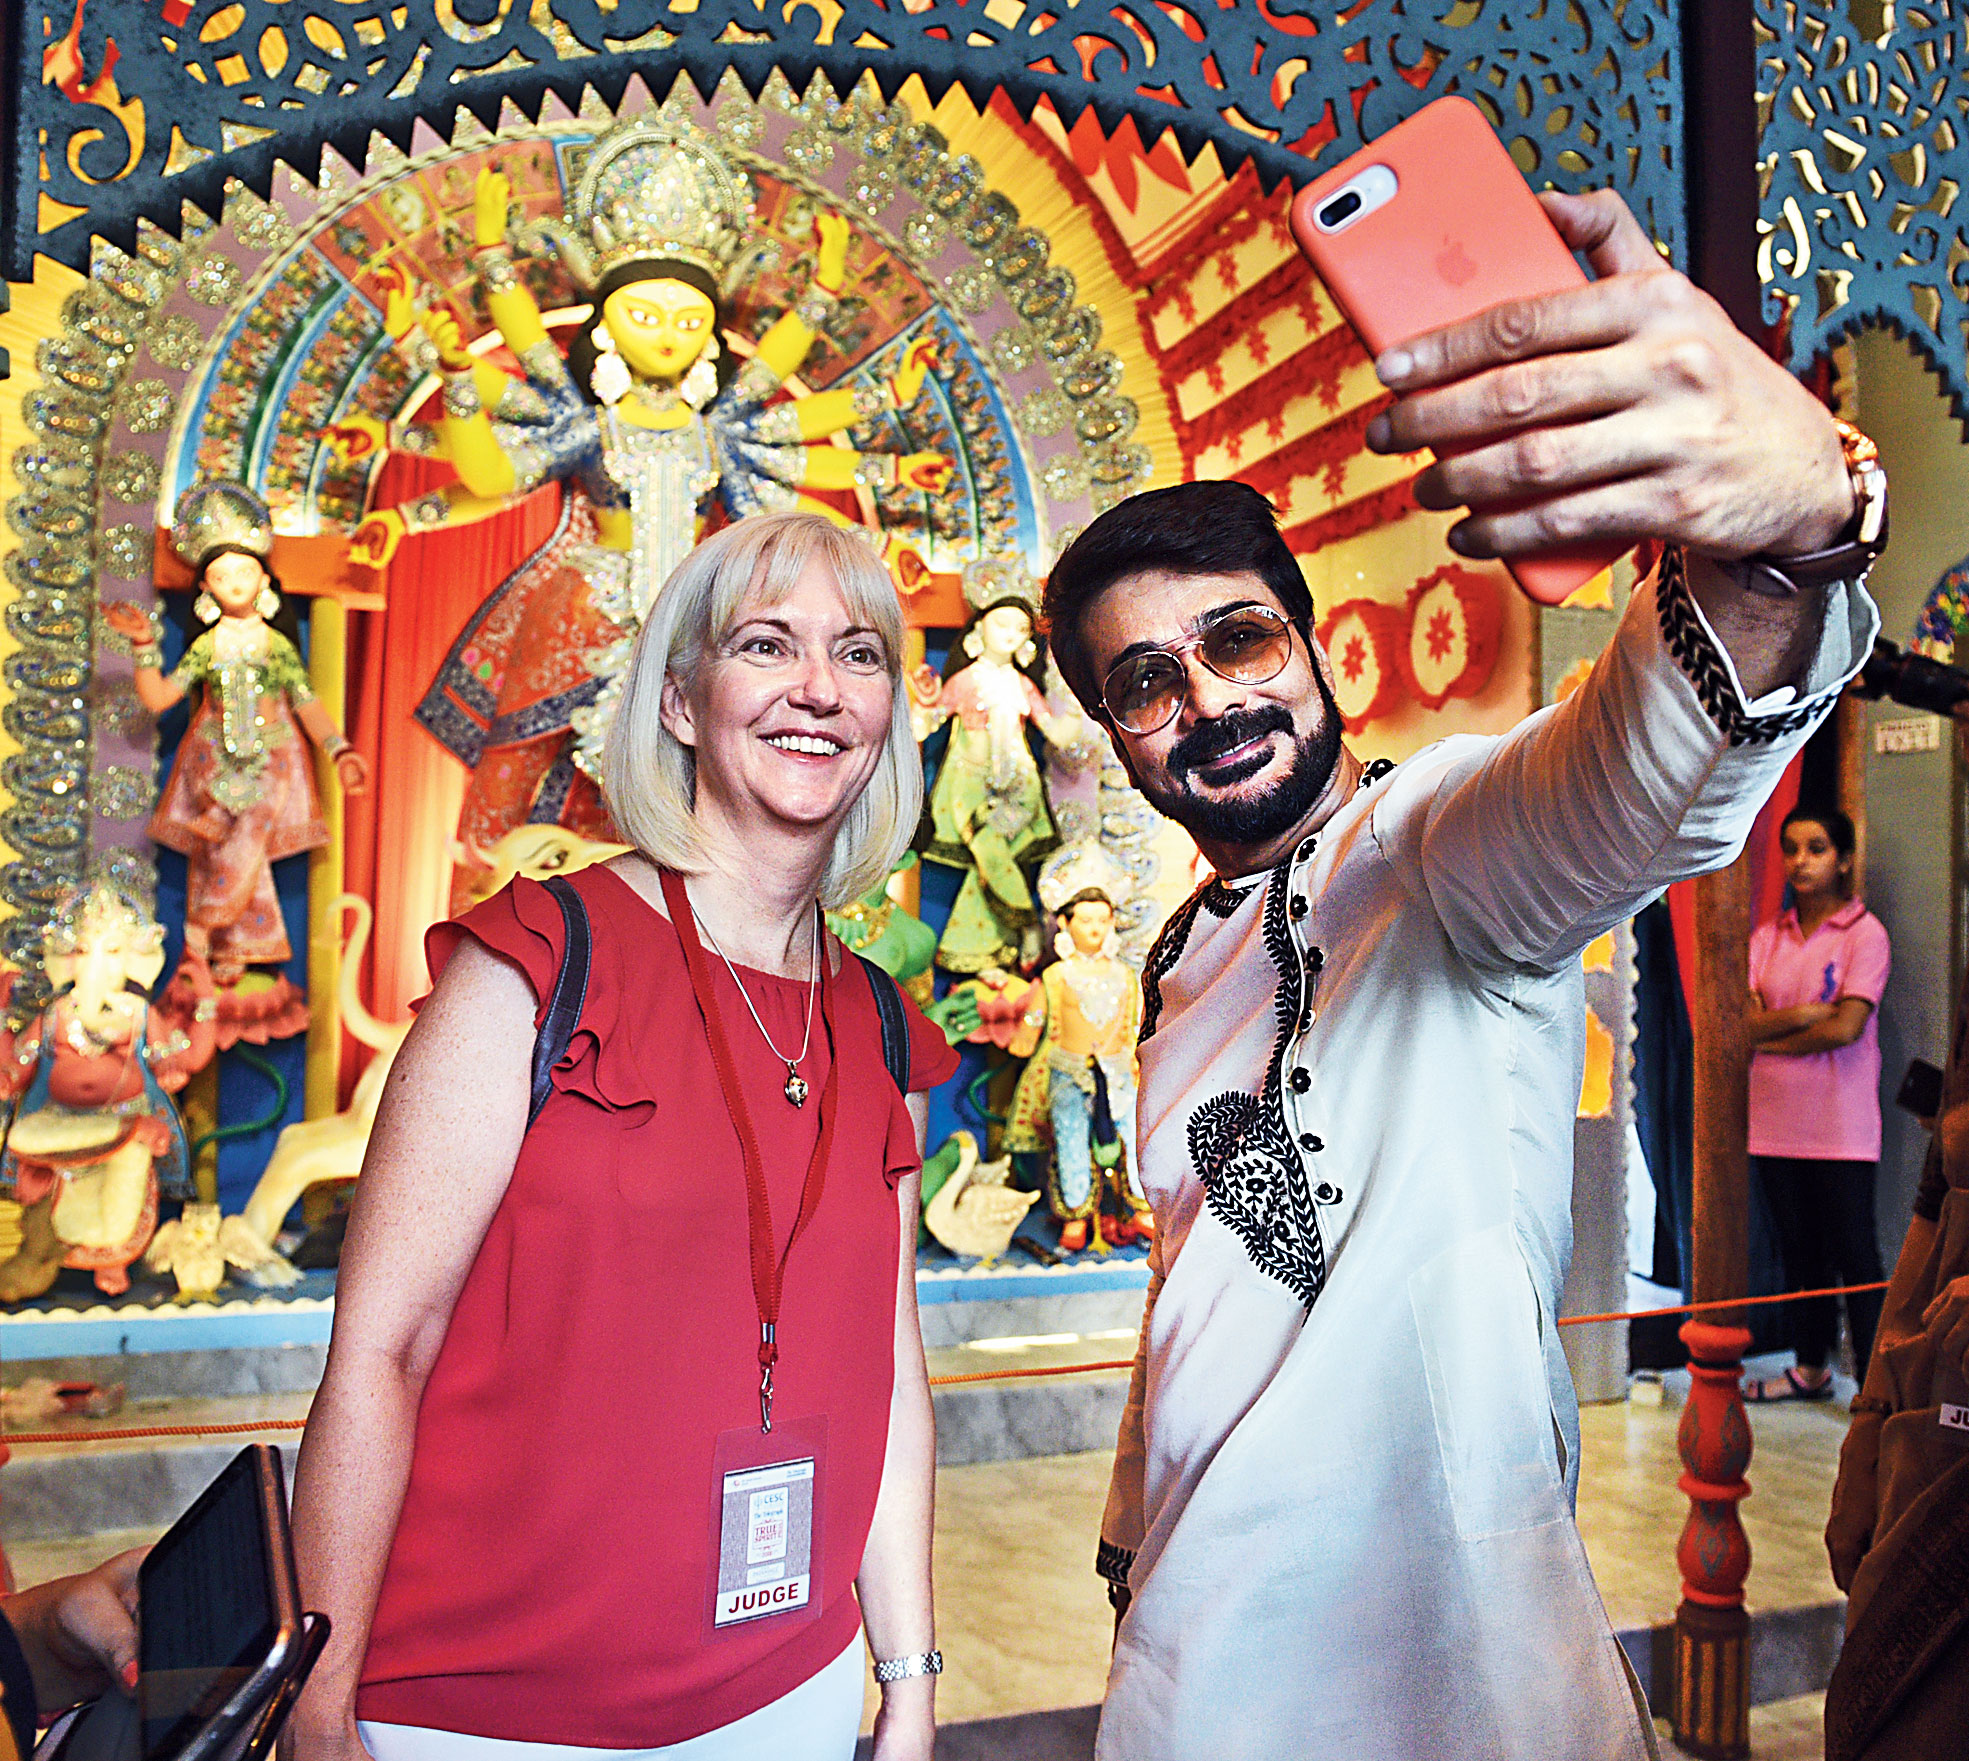 Prosenjit and Patti Hoffman take a quick selfie in front of the idol before resuming judging duties